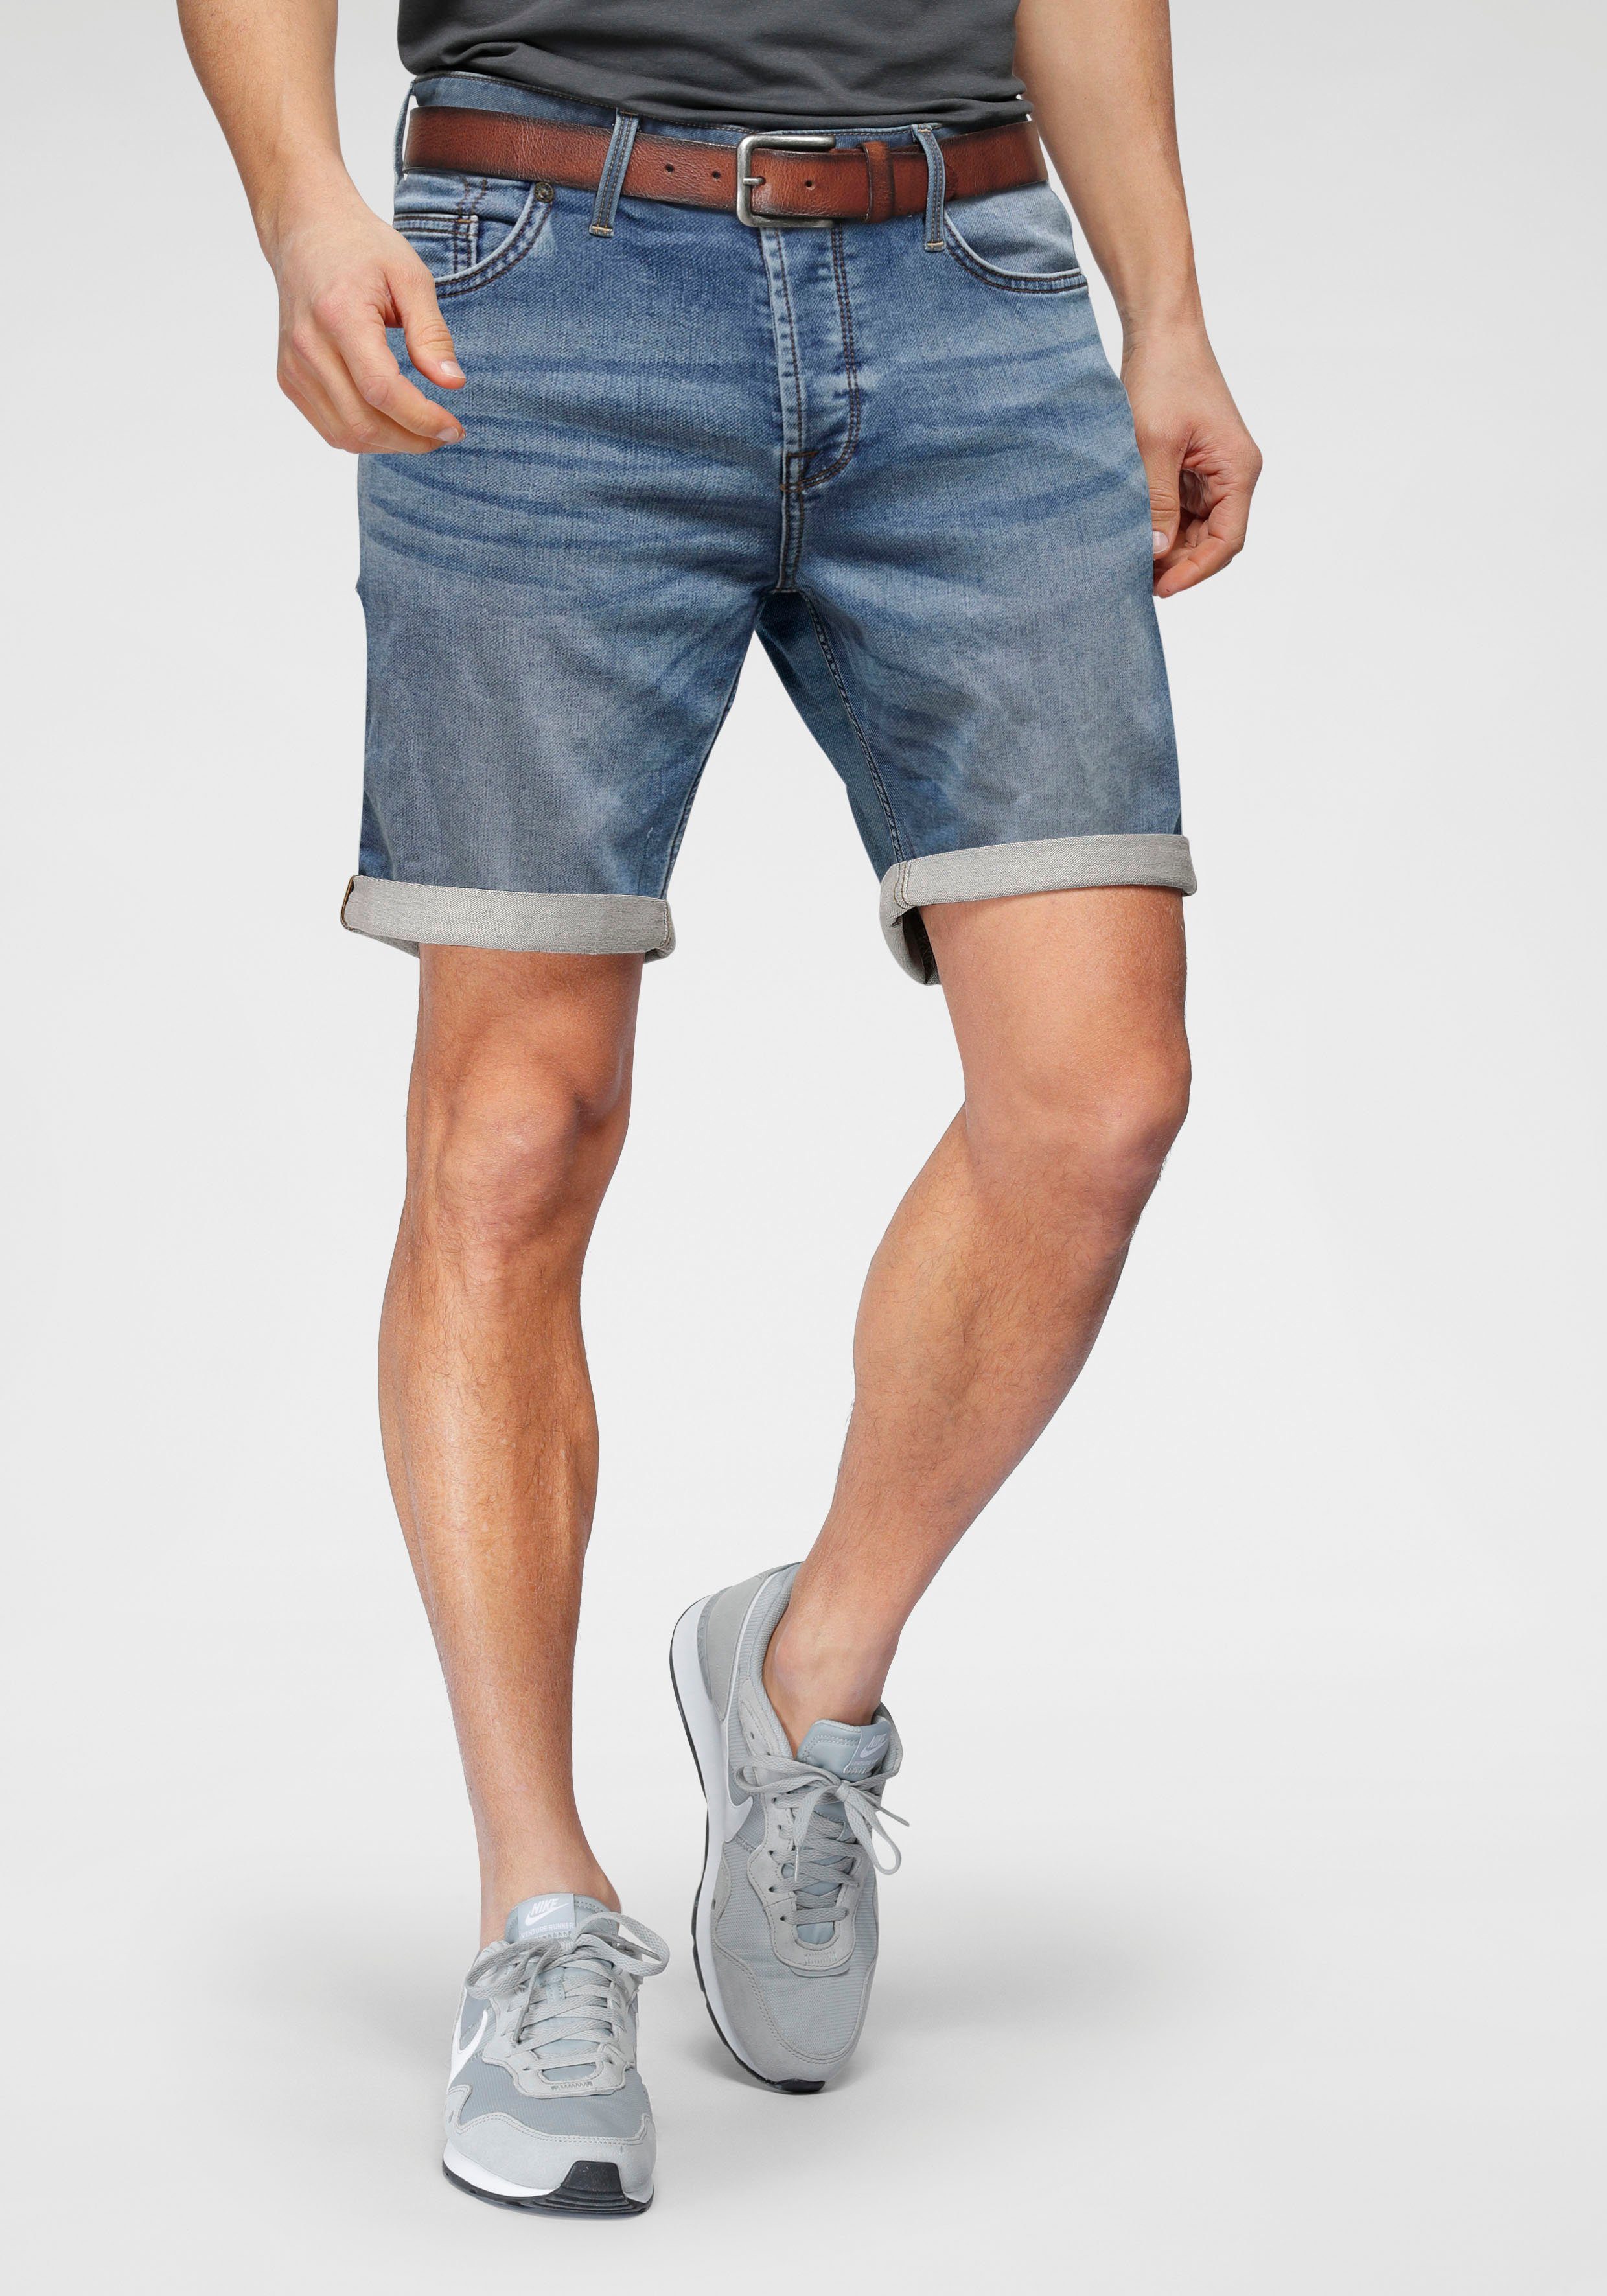 ONLY & SONS Jeansshorts ONSPLY LIGHT BLUE 5189 SHORTS DNM NOOS denim Blue